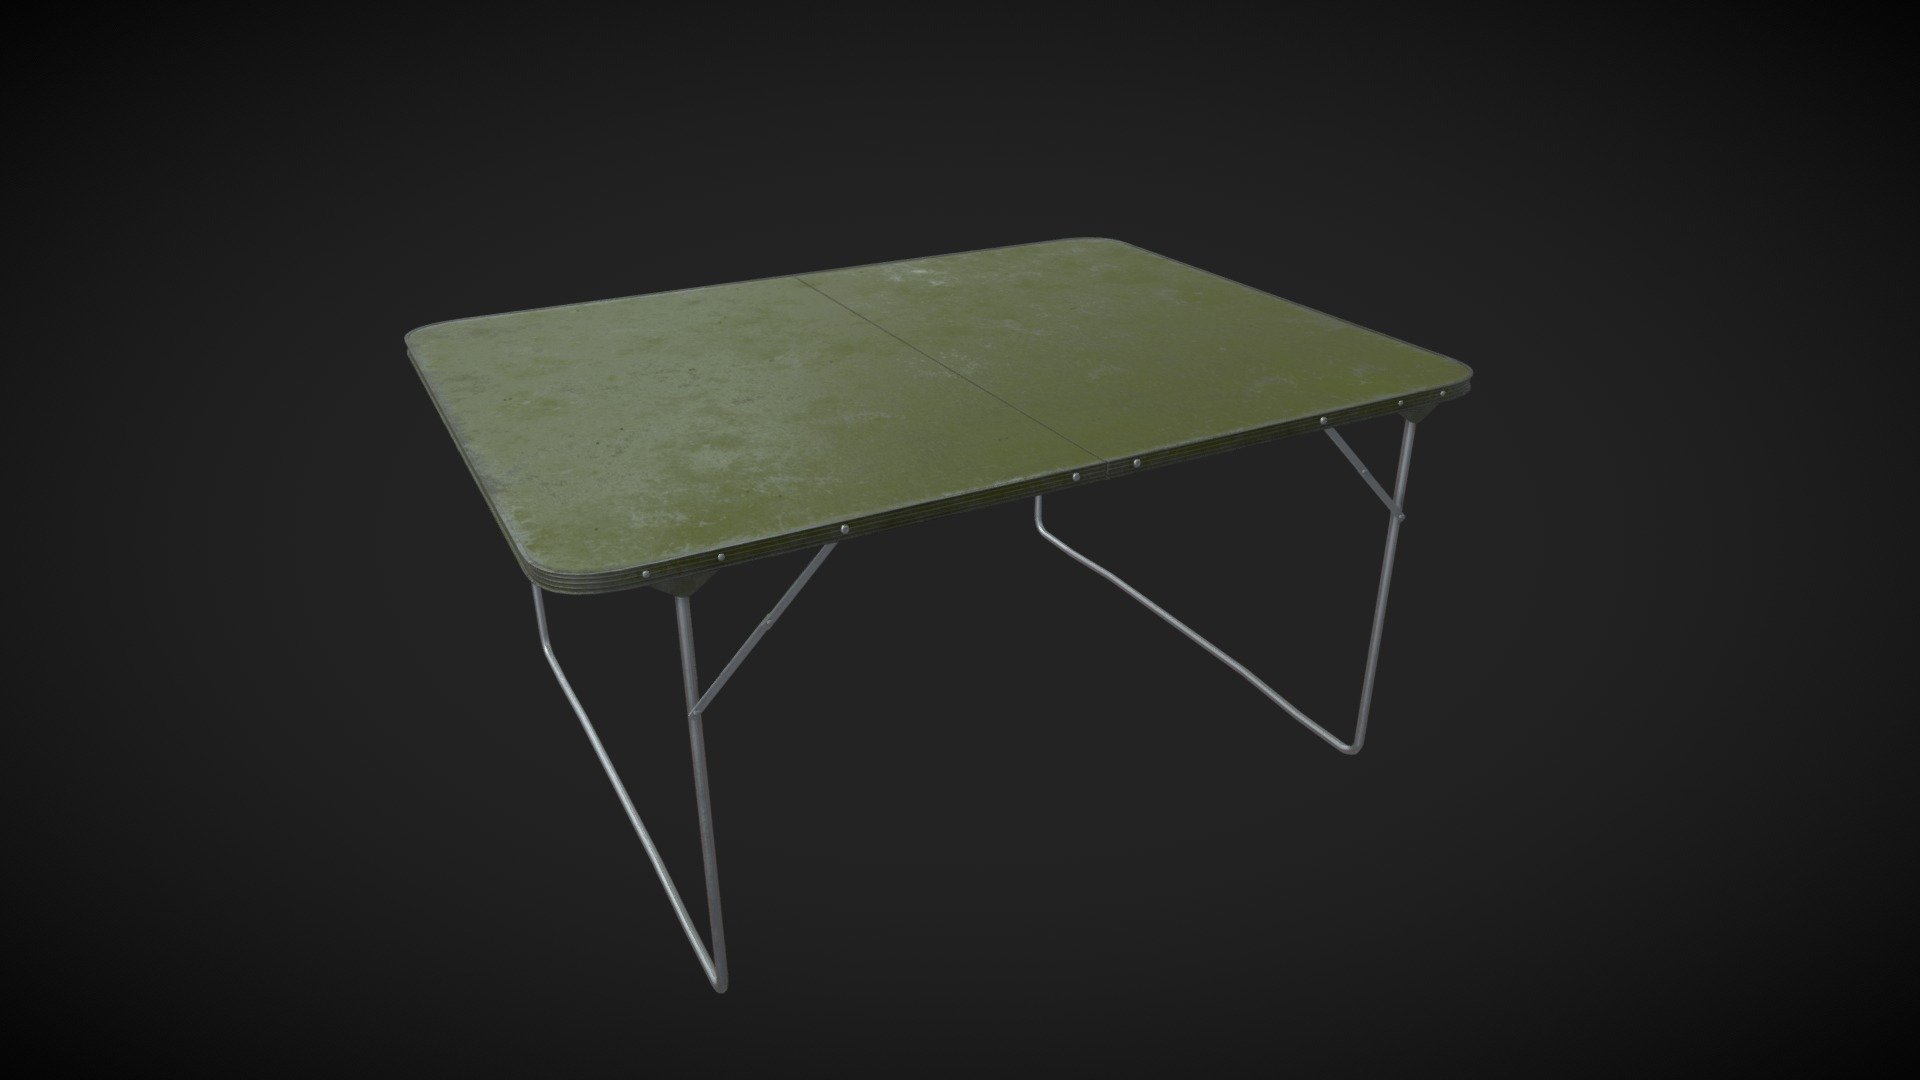 Military metal table. 3d model with optimized mesh. No. model is suitable for games, scenes and rendering.
If you have any questions, you can write to me. Do not be shy).

Textures 2k.

Polygons: 2 626
Vertices: 2 708 - 3D Military metal table model - Buy Royalty Free 3D model by 3dAssetsForGames (@3dAssatsForGames) 3d model